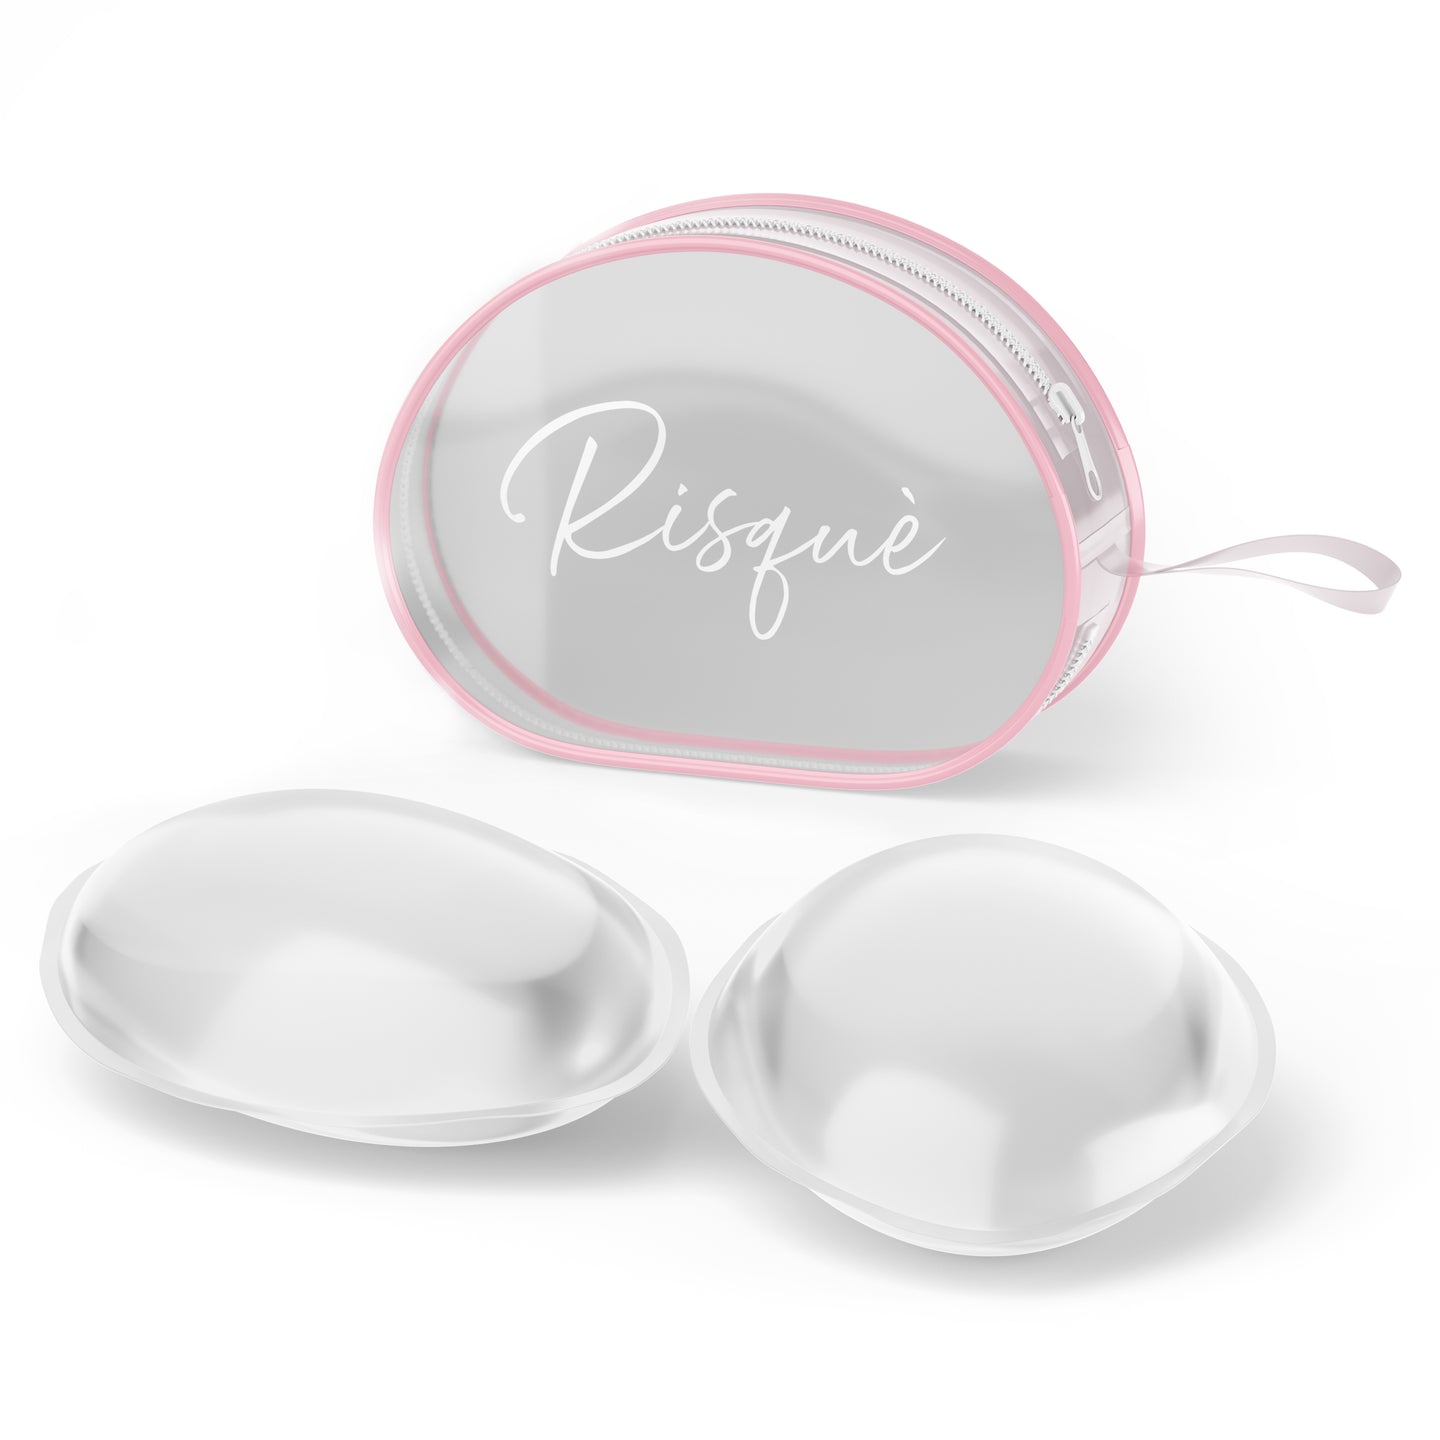 Silicone Bra Inserts Clear Breast Enhancers, High Quality Silicone